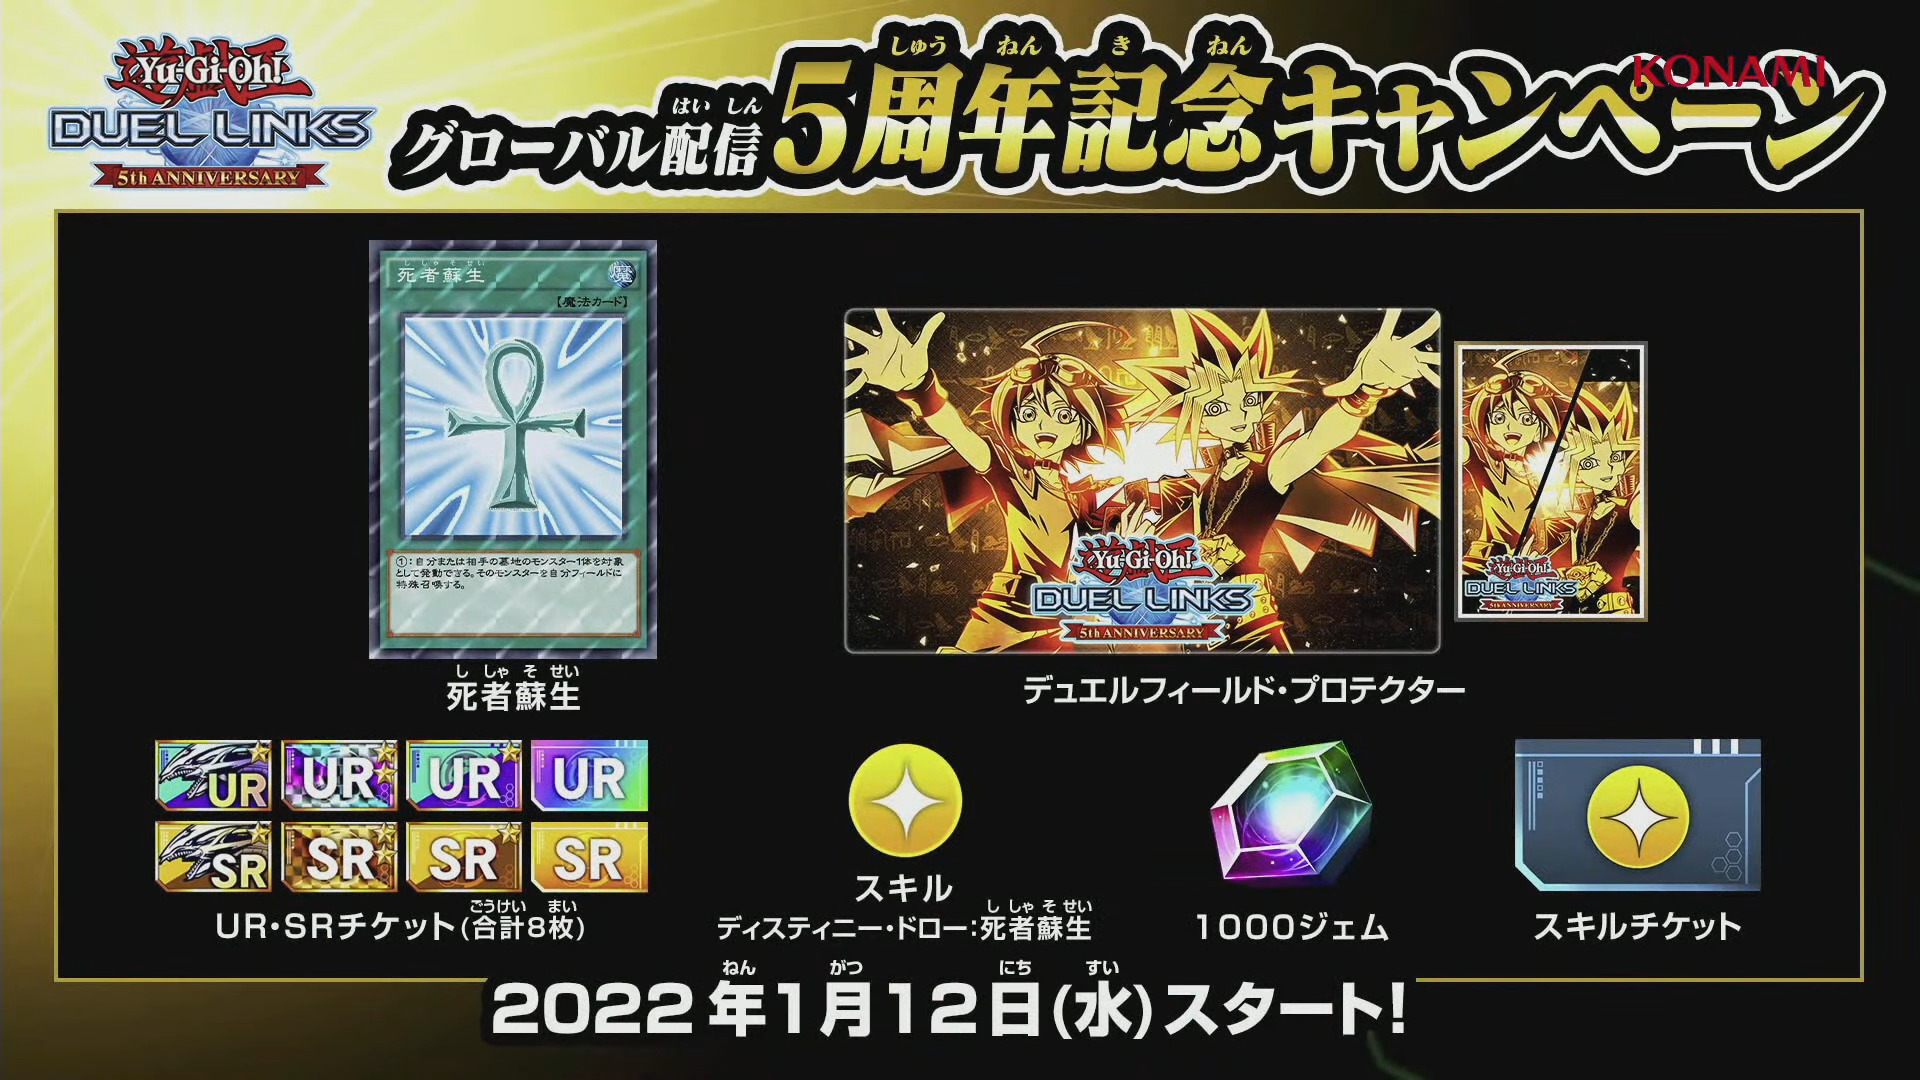 [Duel Links] Global 5th Anniversary Campaign and New